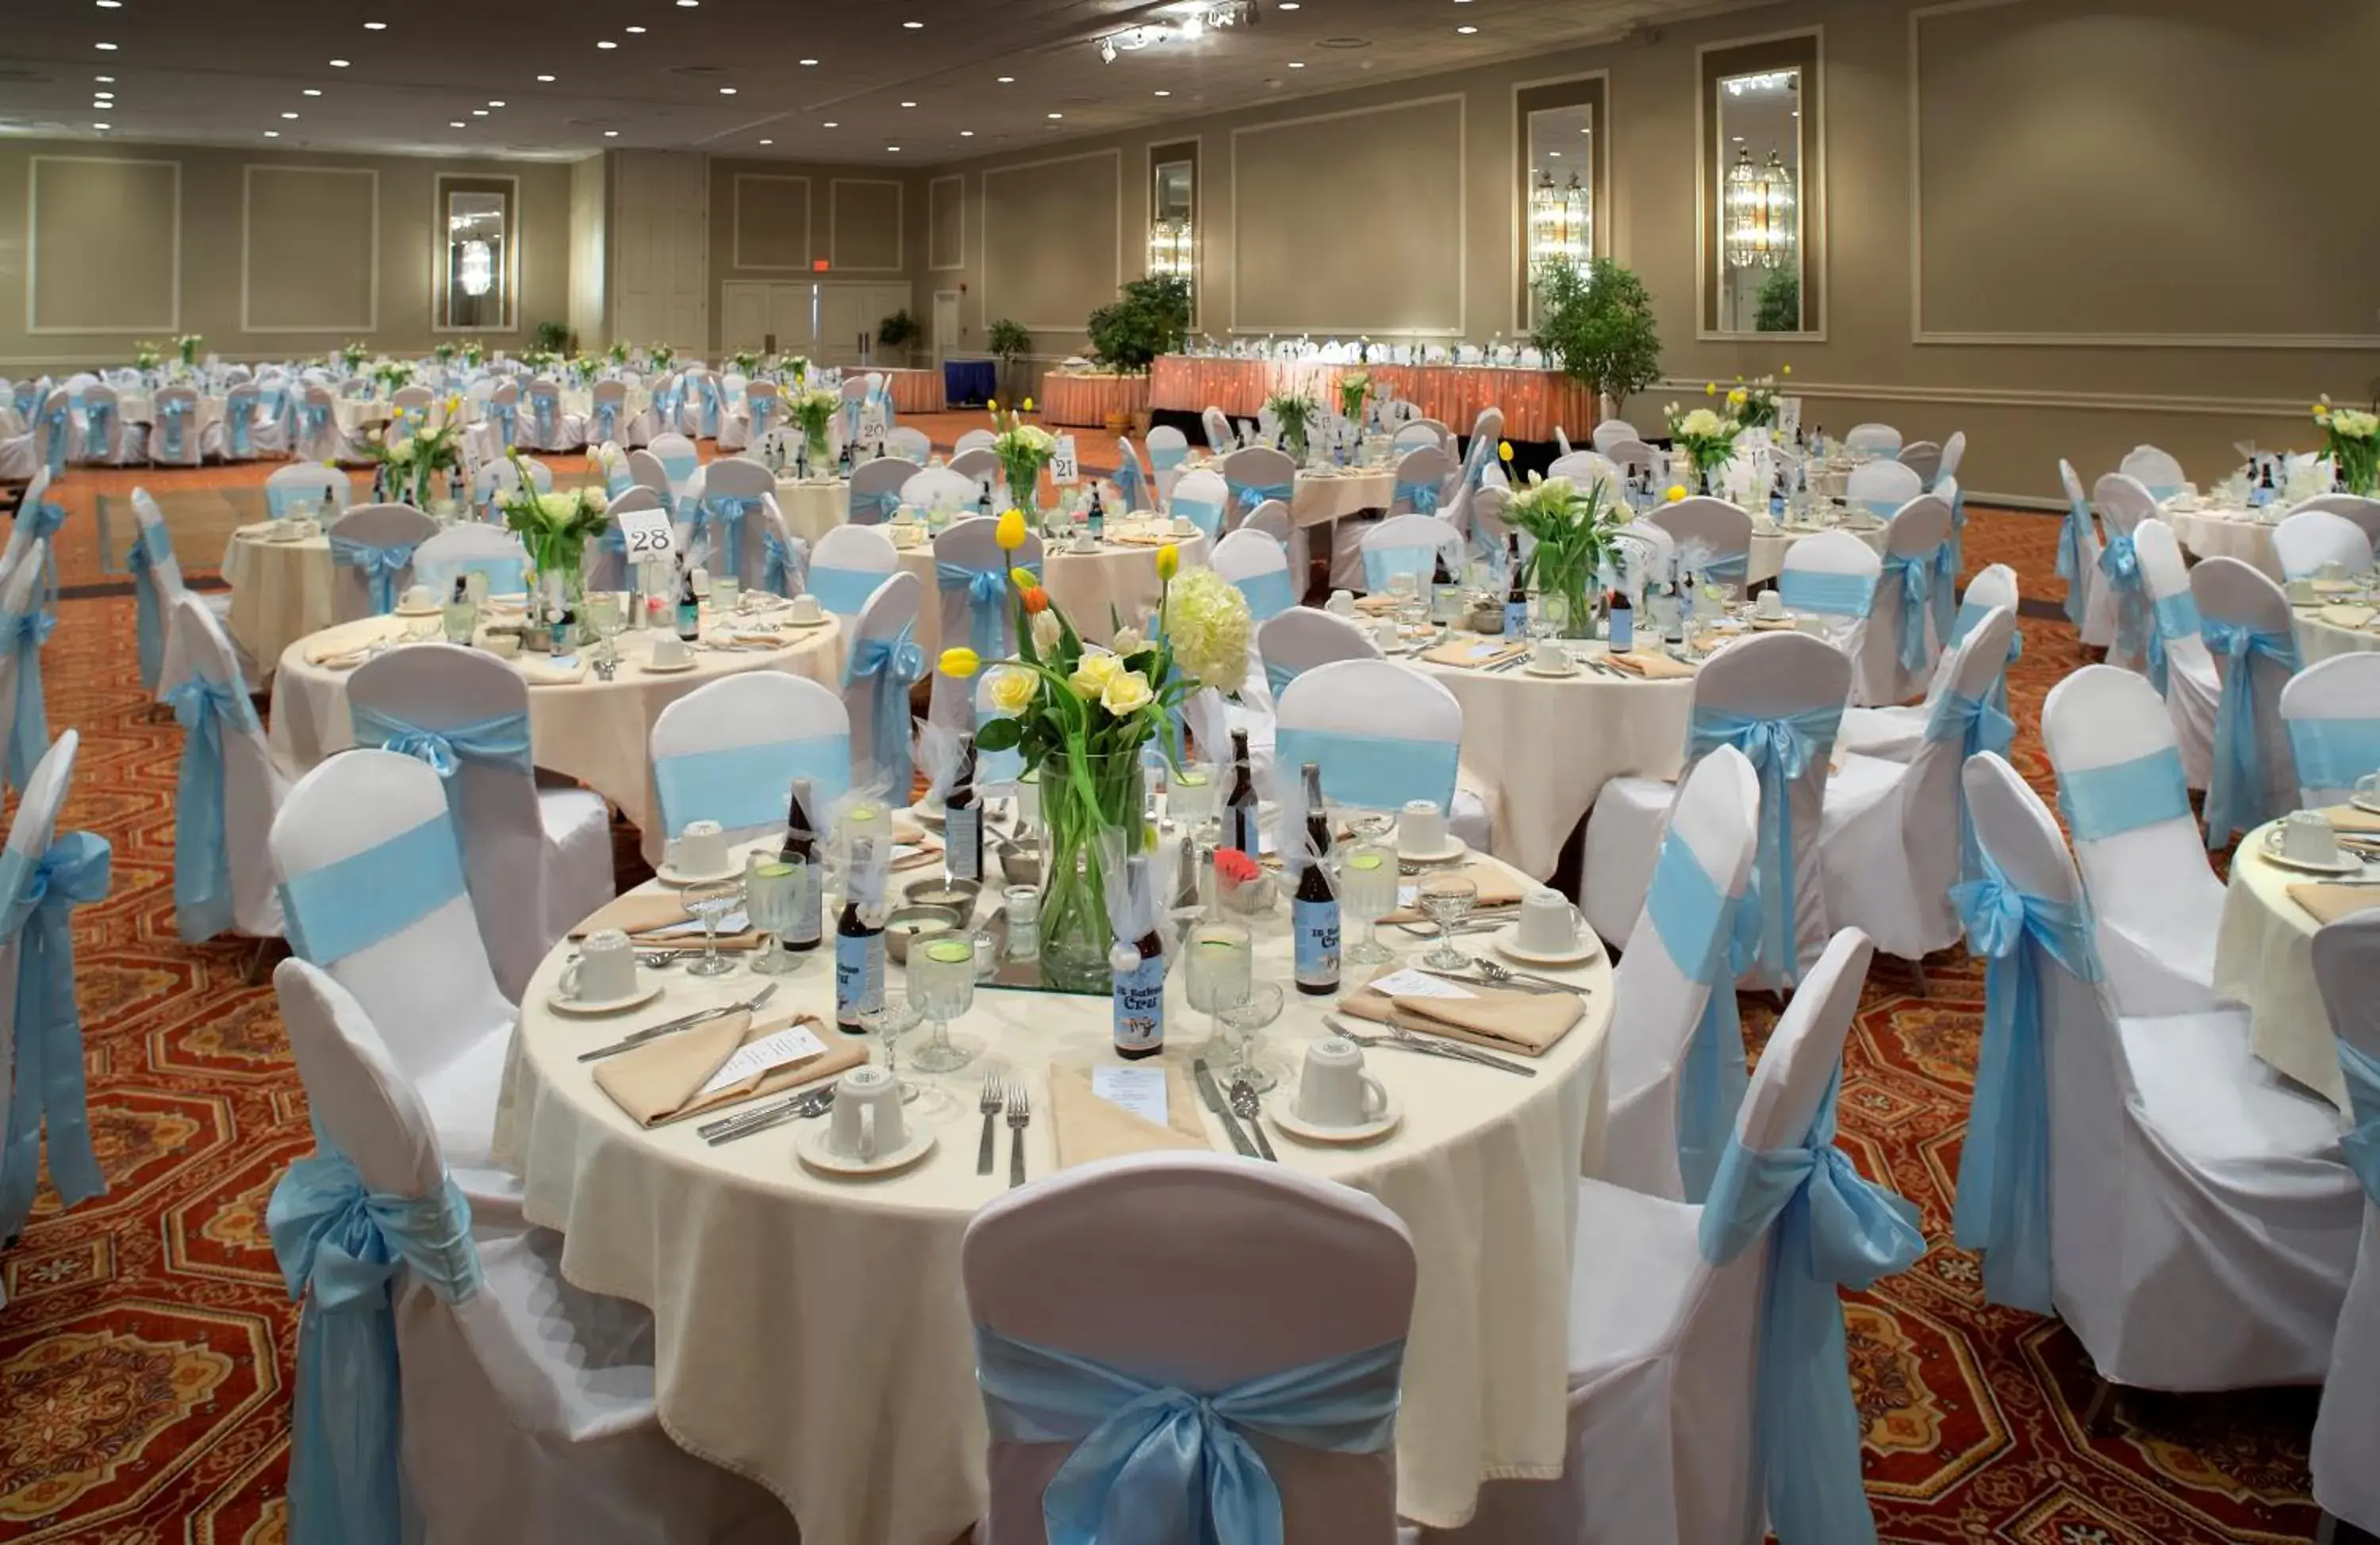 Banquet/Function facilities, Banquet Facilities in The Avalon Hotel and Conference Center